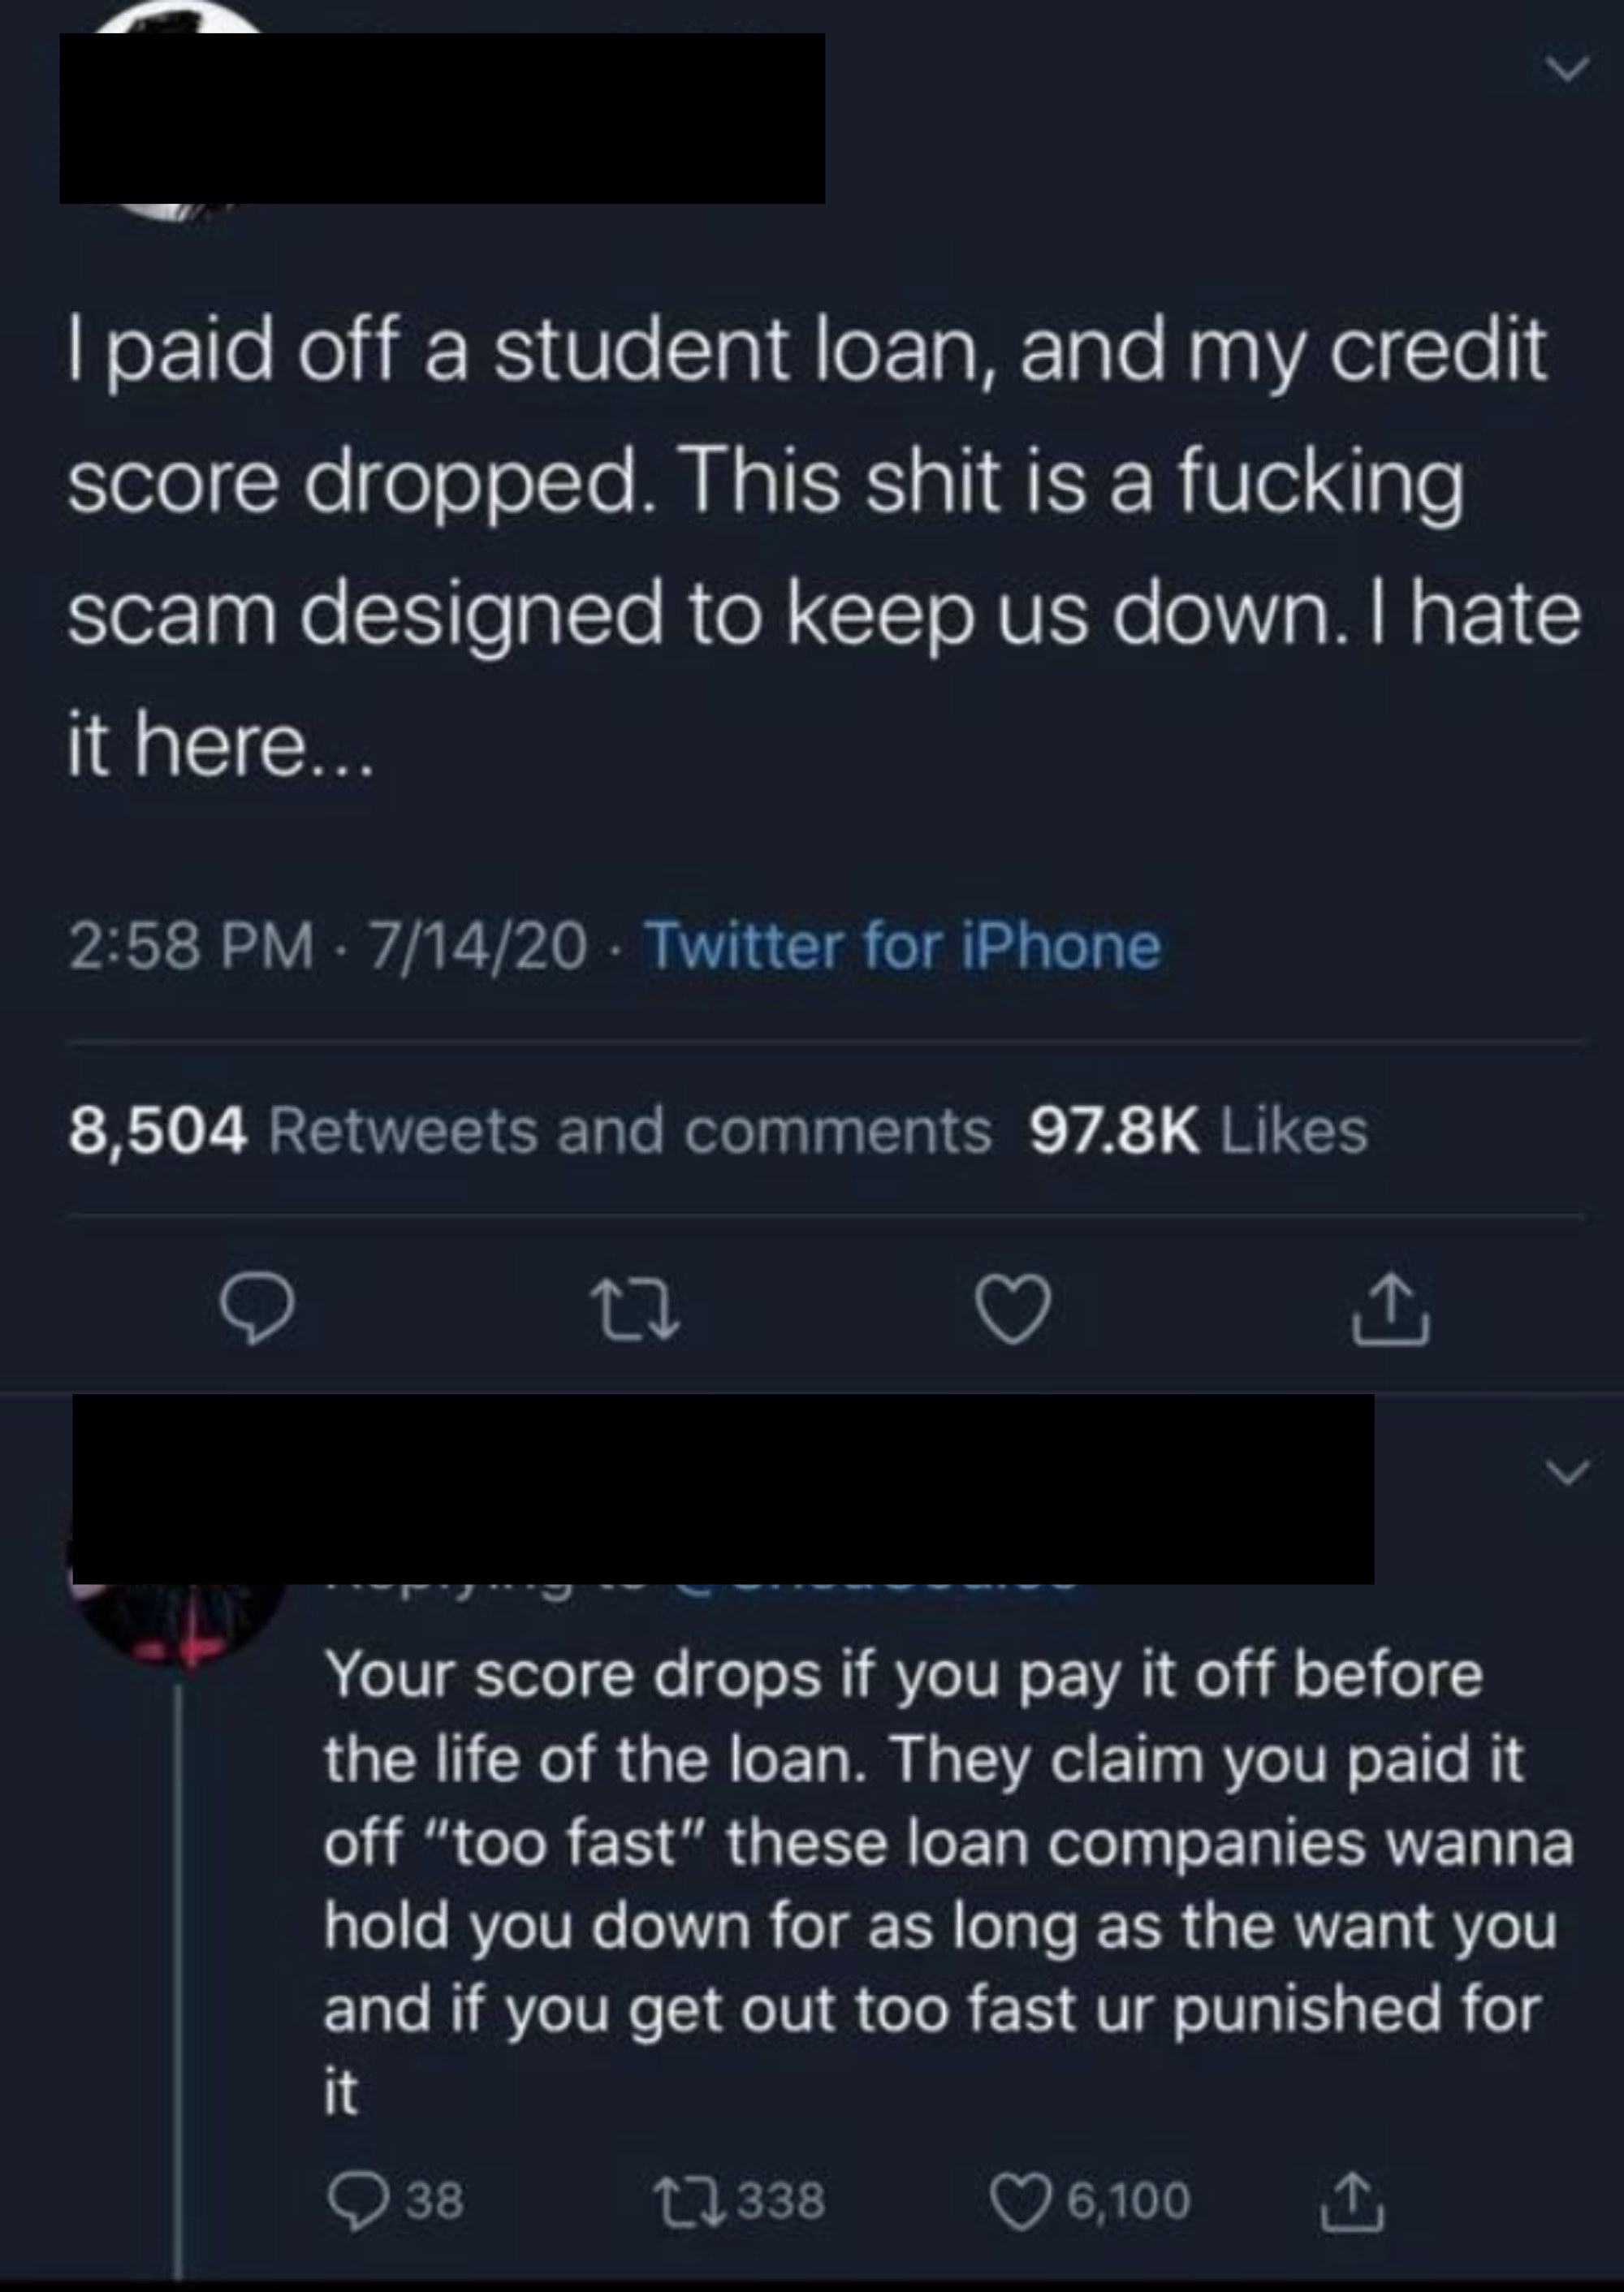 Tweet about how they paid off their student loan and their credit score went down because loan companies wanna hold you down for as long as possible